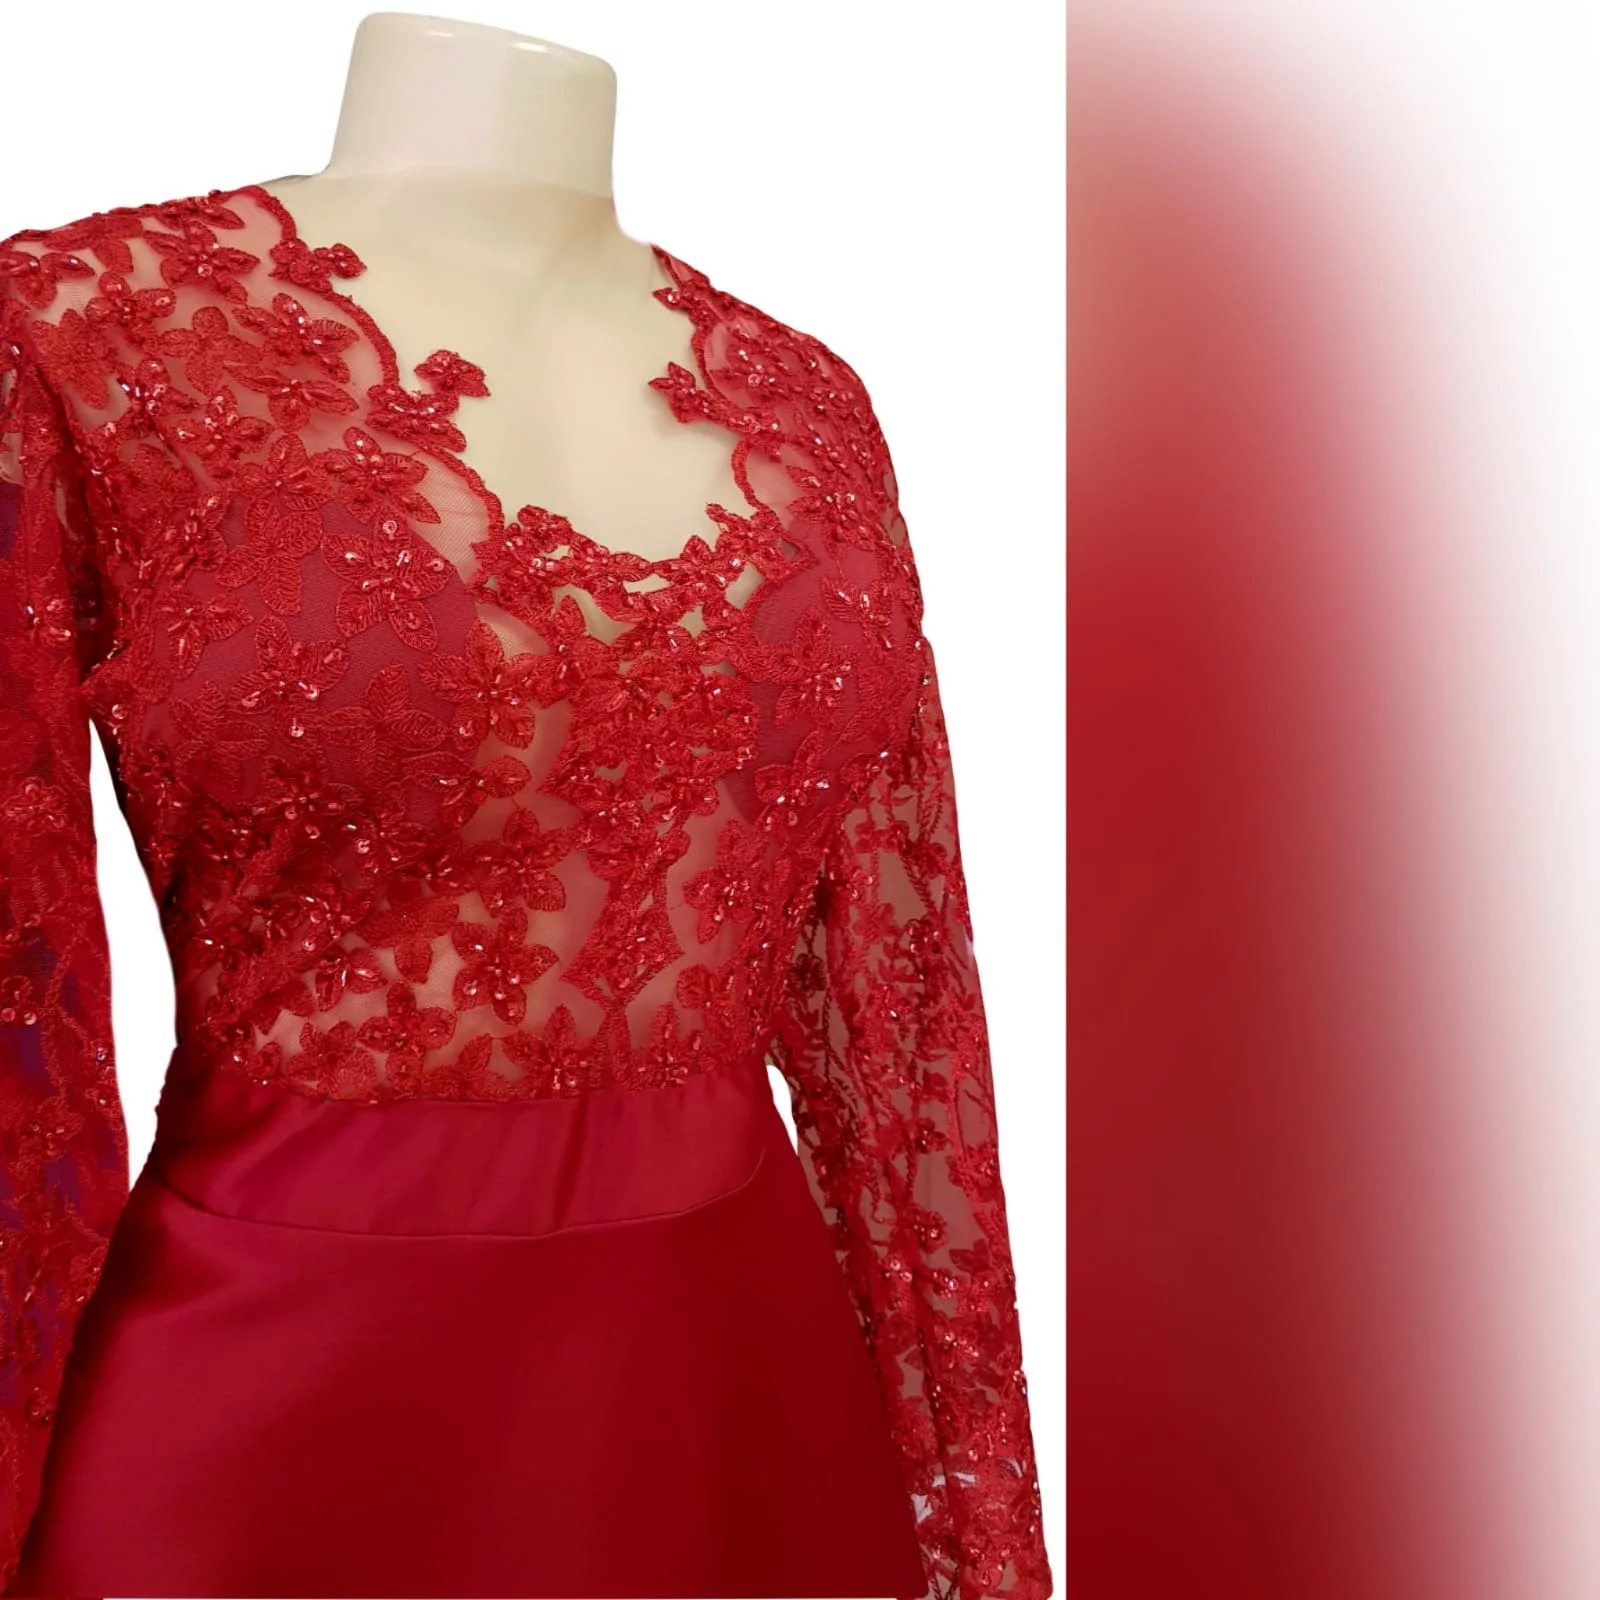 Classic red lace and satin prom dress 8 <blockquote>"don't compromise yourself. You're all you've got. " janis joplin</blockquote> a classic red lace and satin prom dress created for my client's special occasion. With a sheer lace and sleeves bodice with a touch of shine, and a row of buttons to finish off the sensual back design.